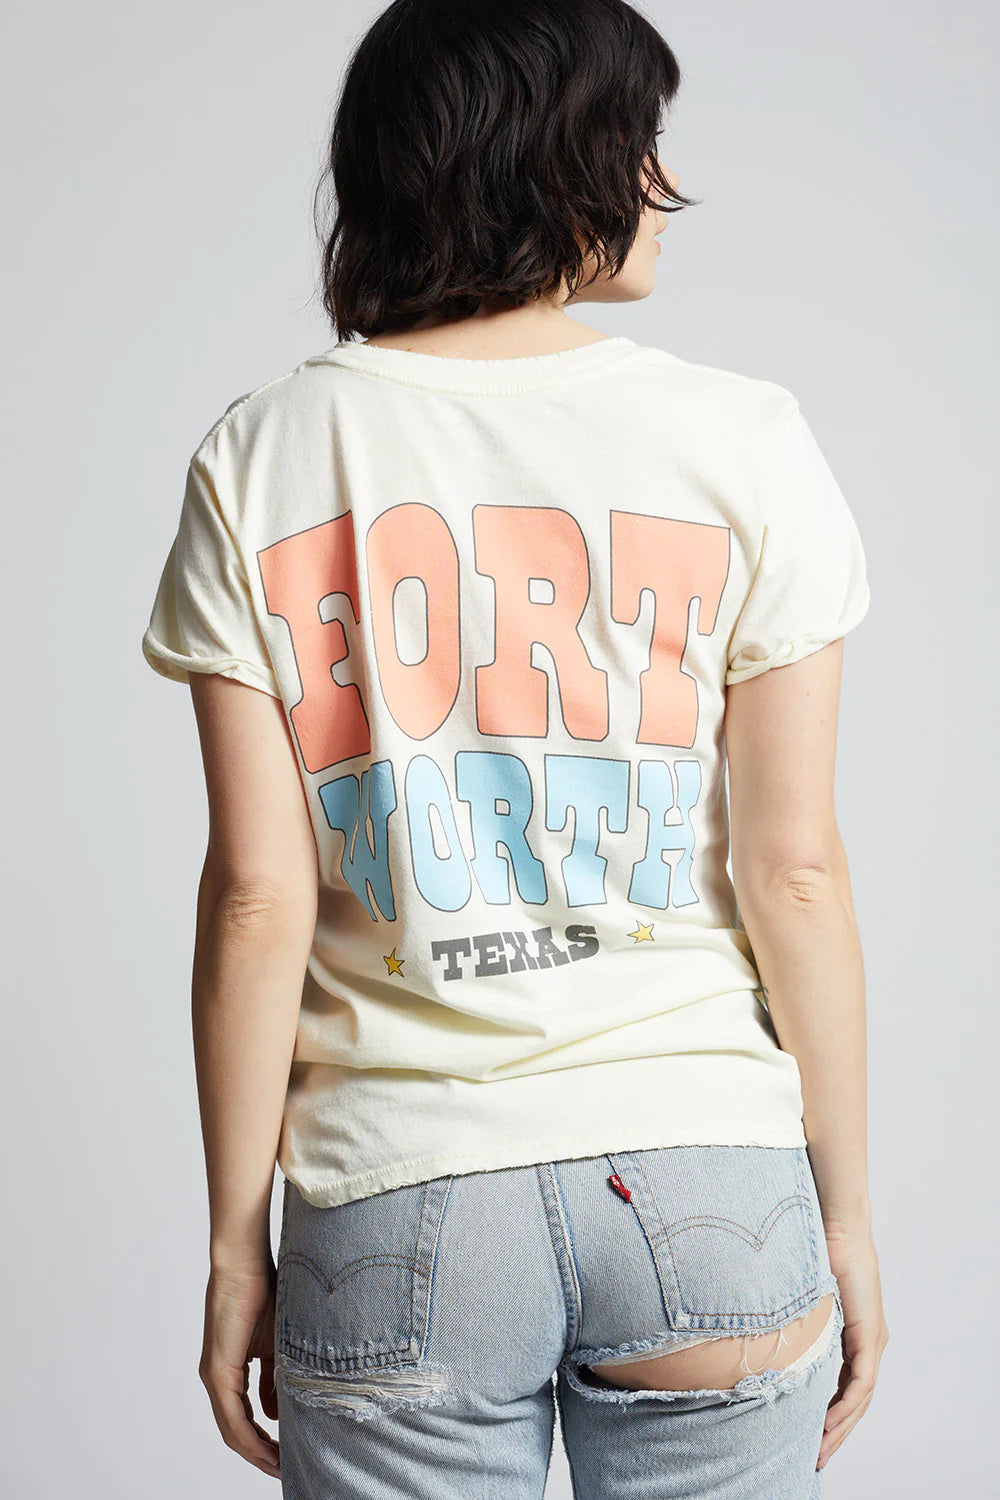 Howdy Fortworth Tee